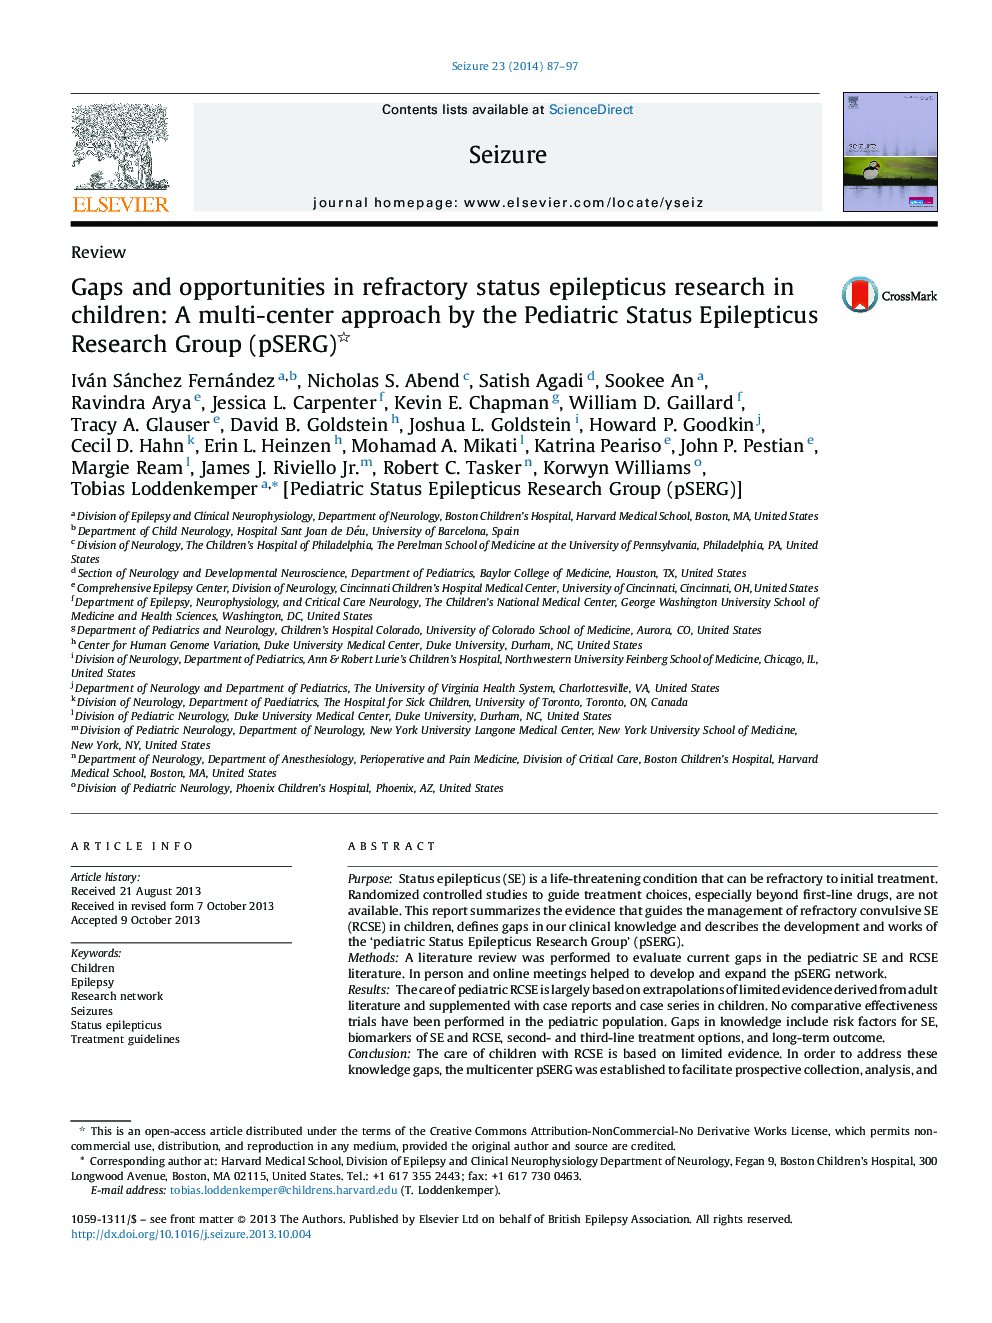 Gaps and opportunities in refractory status epilepticus research in children: A multi-center approach by the Pediatric Status Epilepticus Research Group (pSERG)